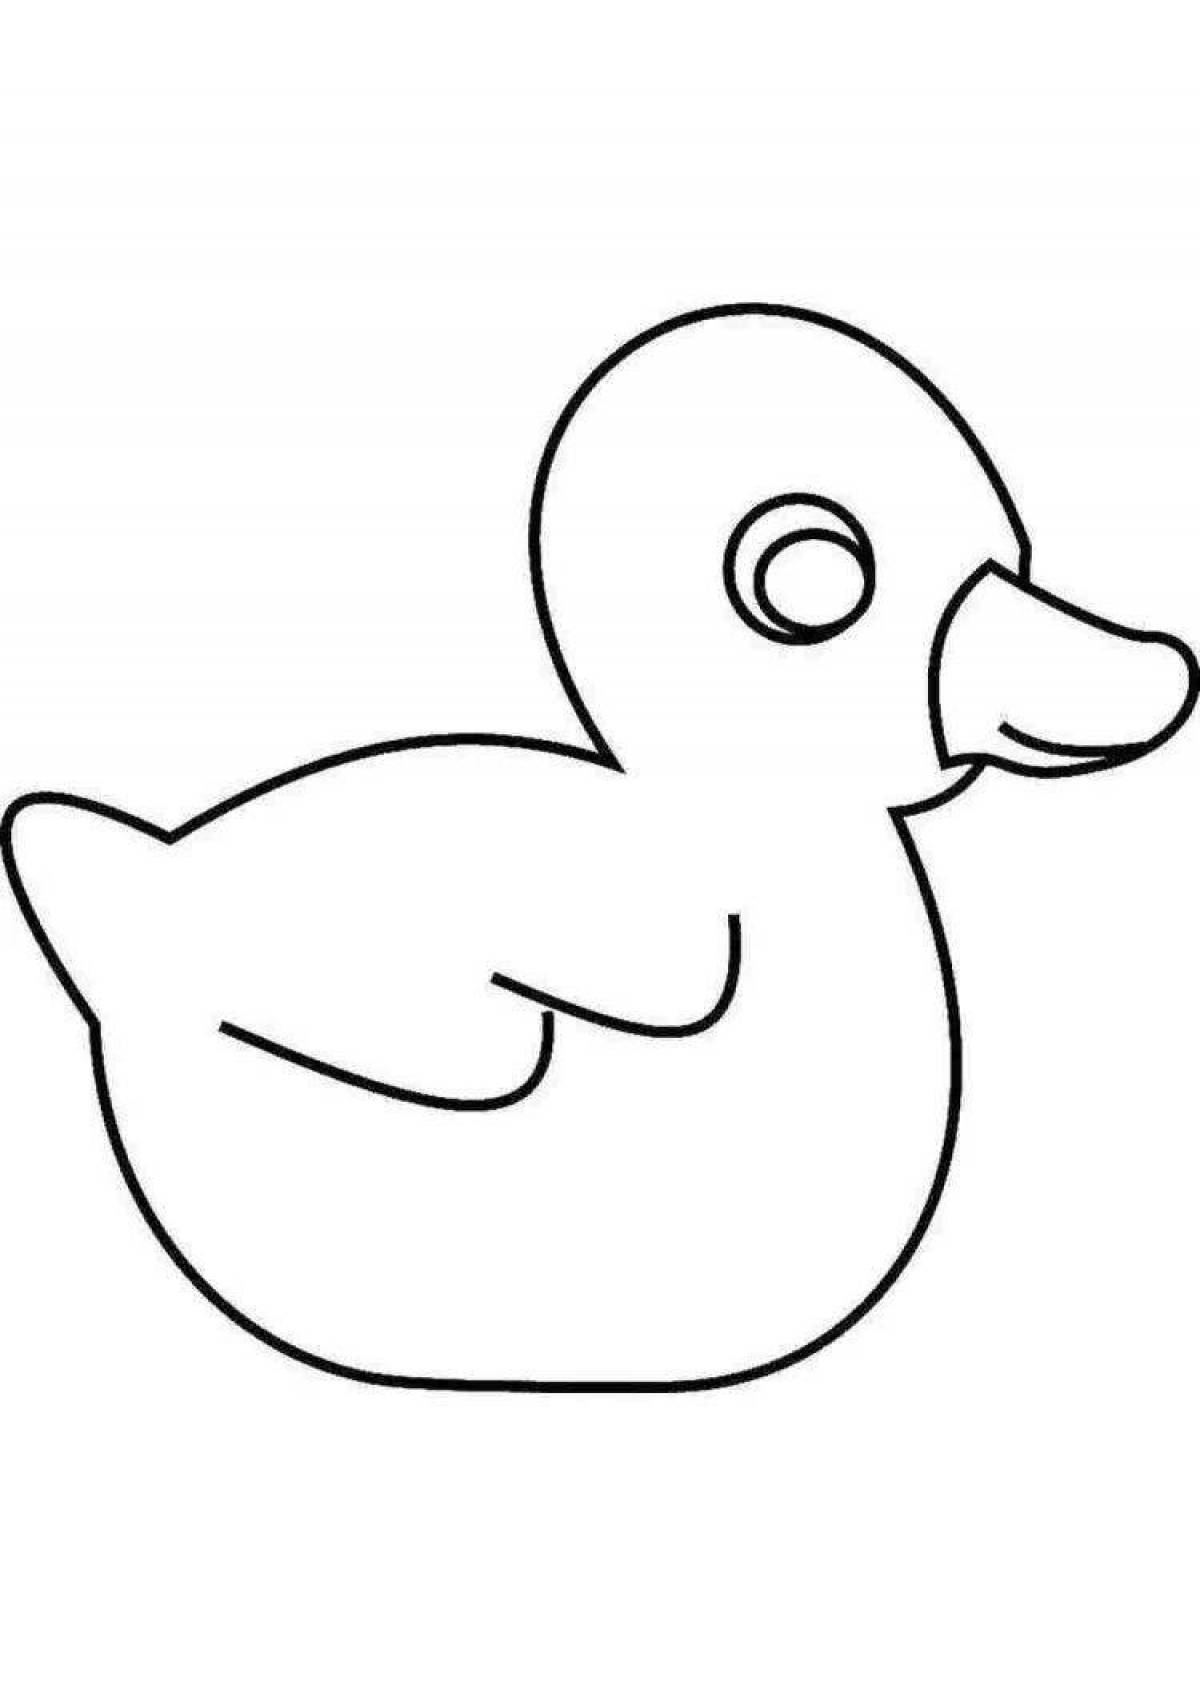 Glowing paper duck coloring page